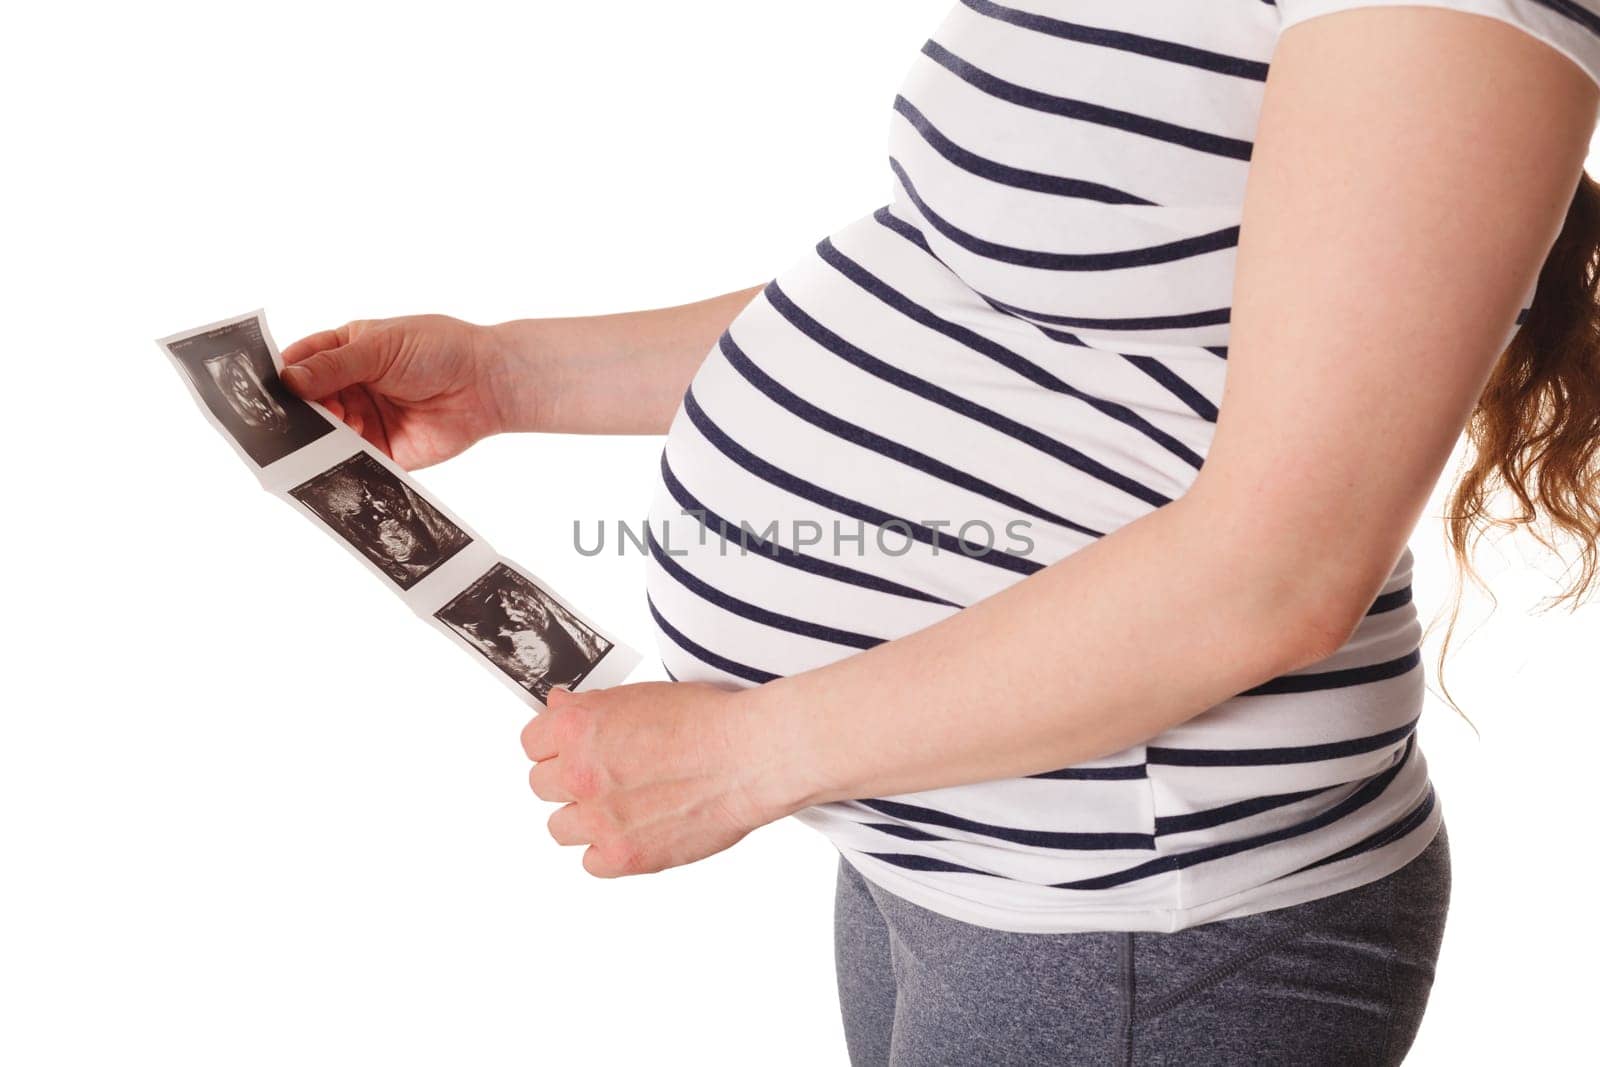 Pregnant woman standing and holding her ultrasound baby scan picture isolated on white